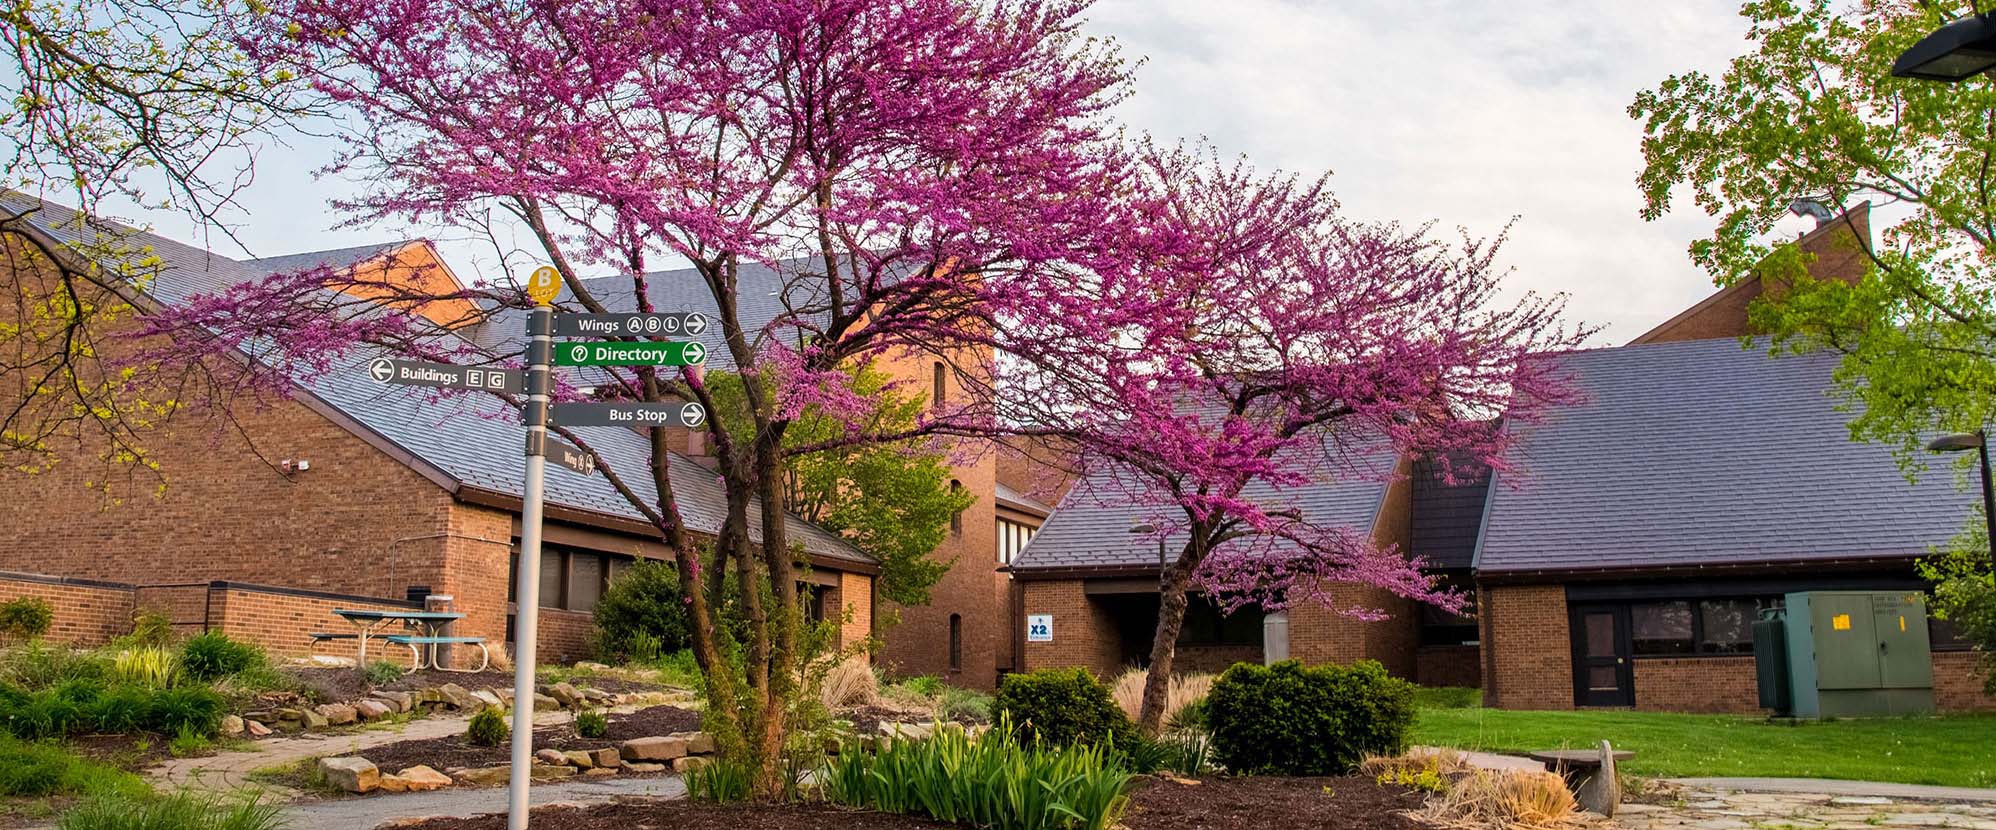 Exterior of College with Blossoming Floral Tree and Directional Sign